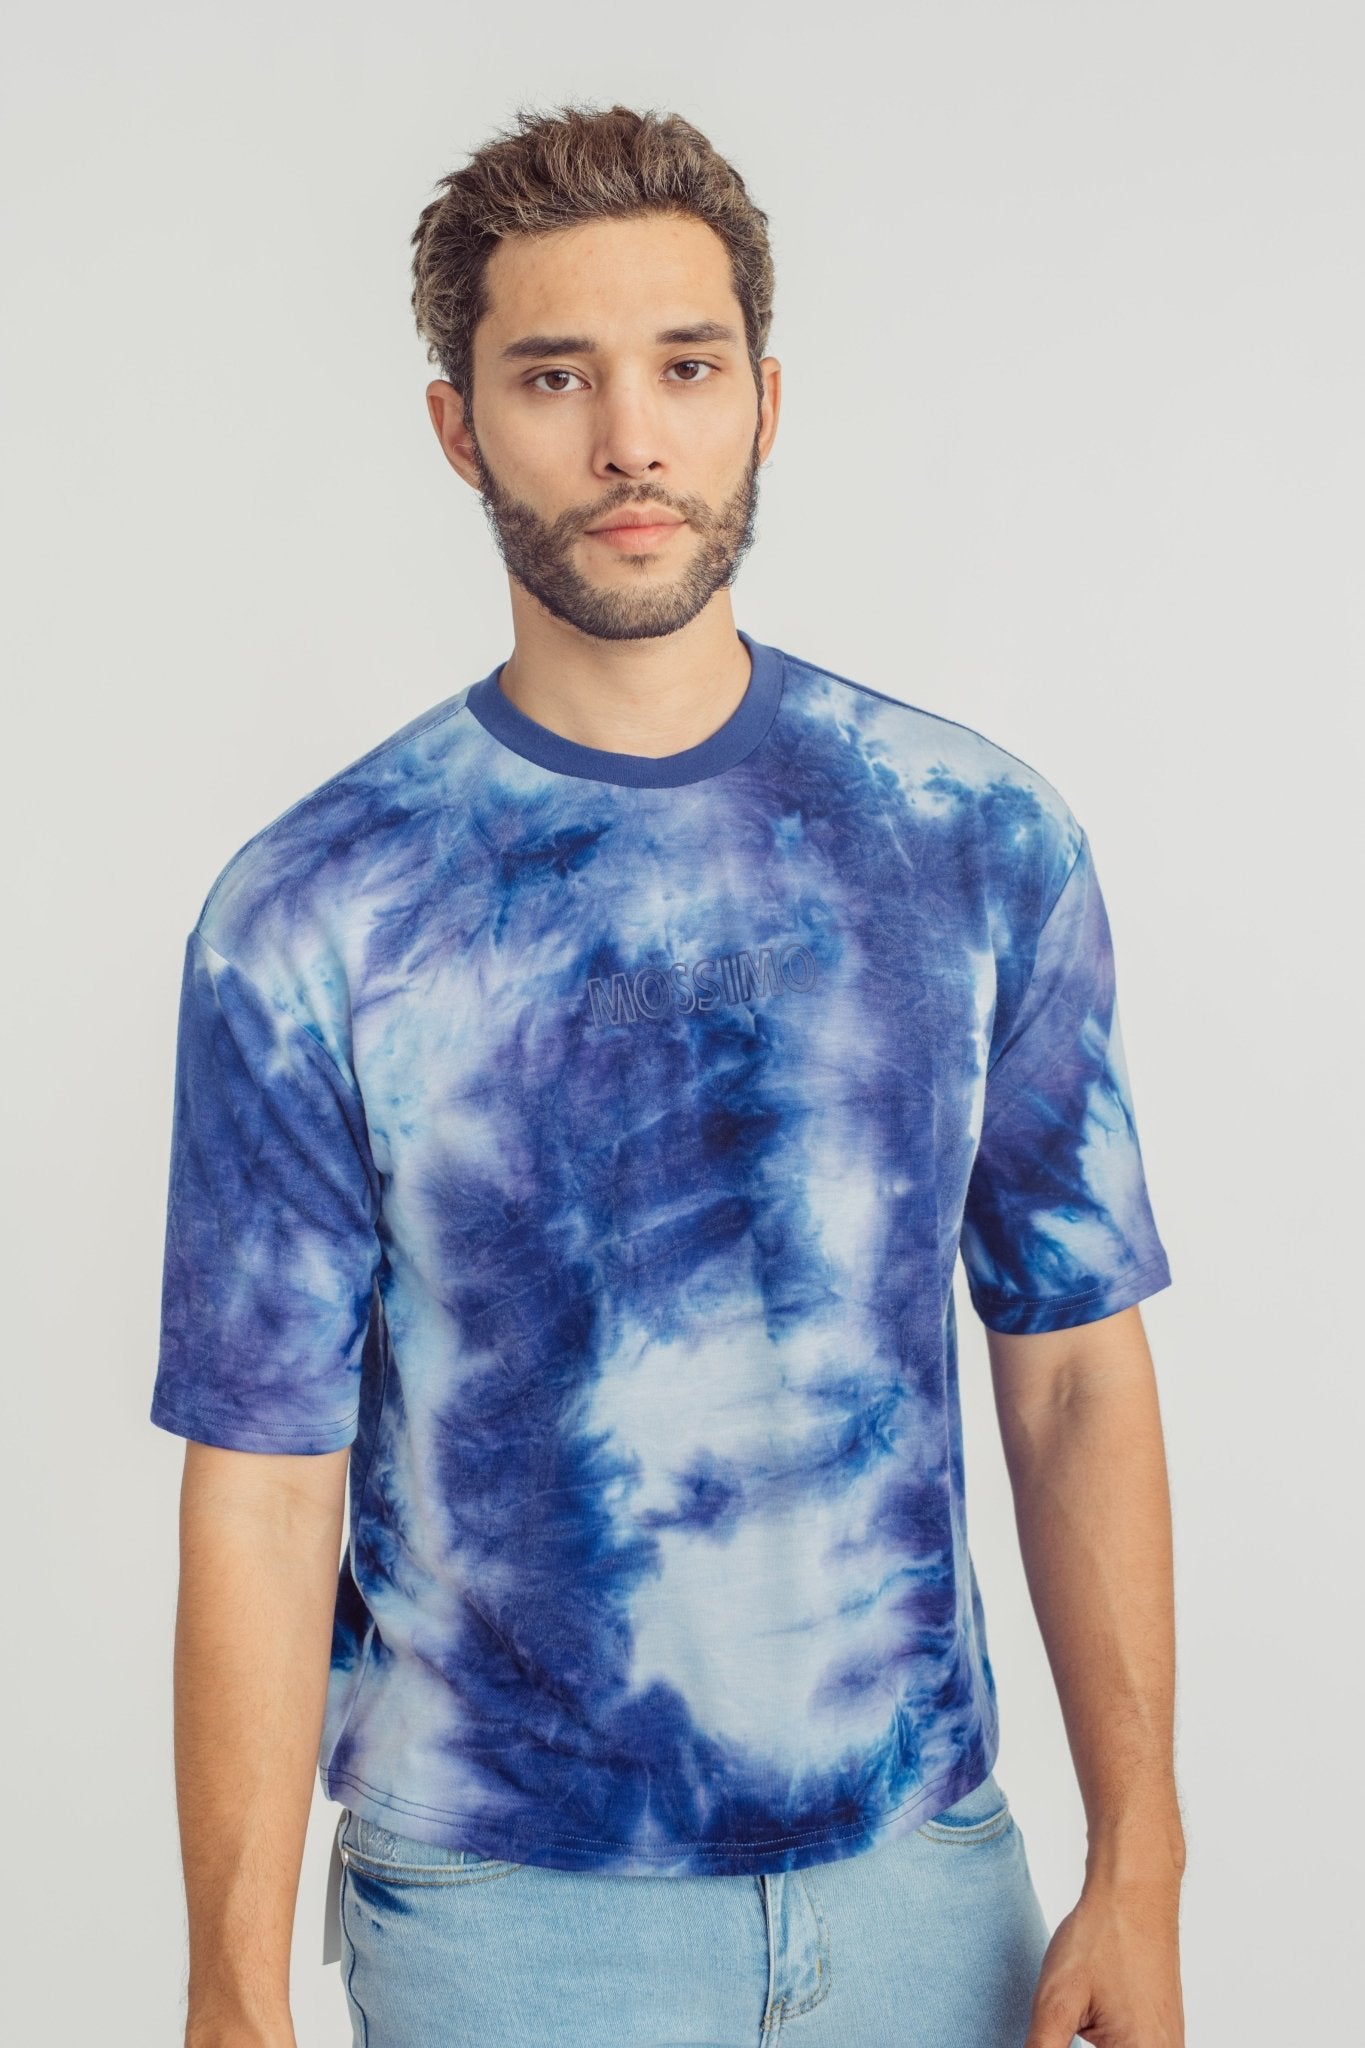 How to tie dye with our step-by-step guide and video